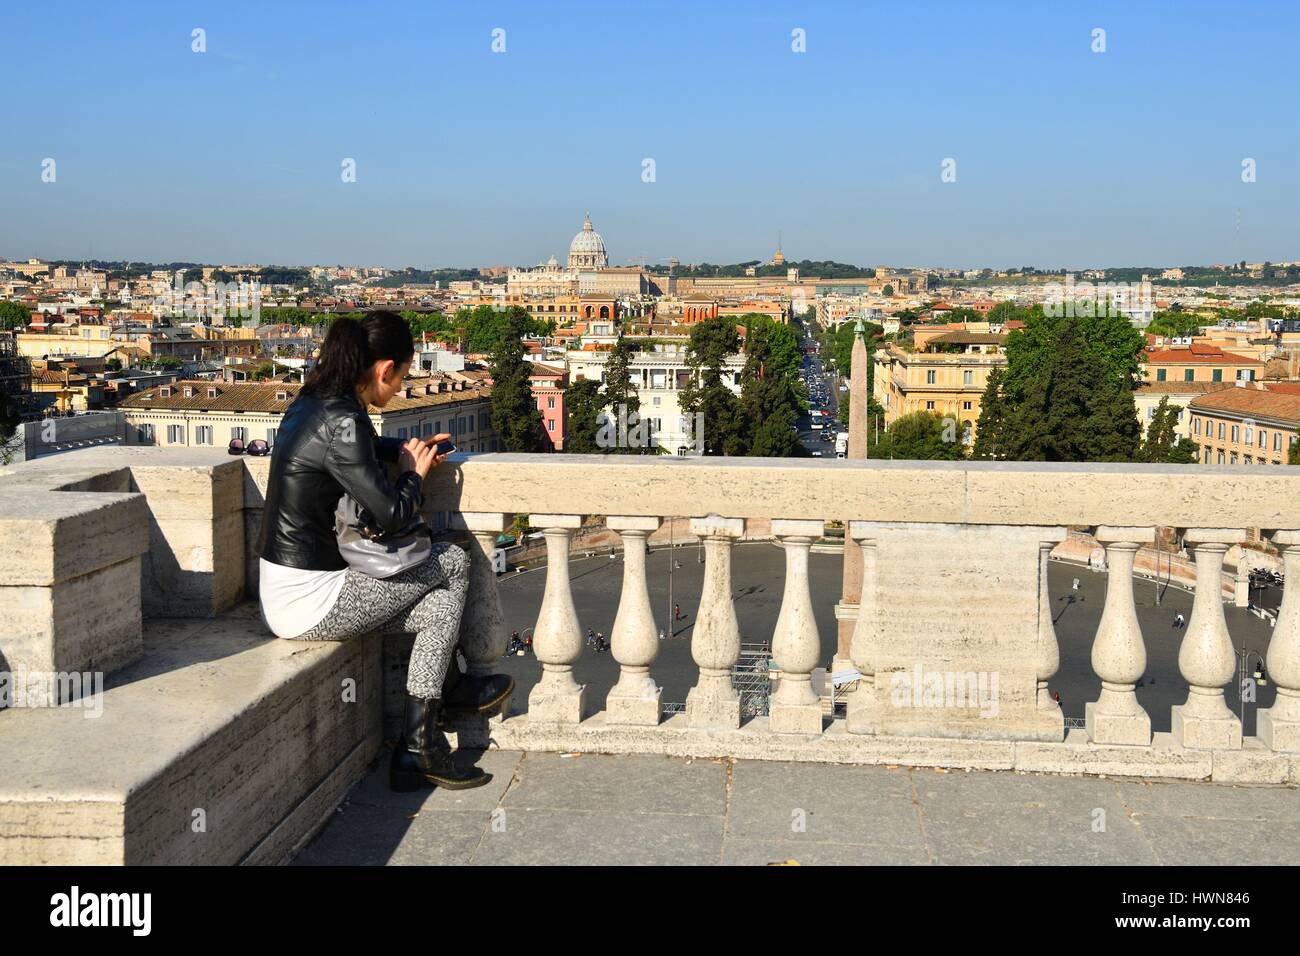 Italy, Lazio, Rome, historical centre listed as World Heritage by UNESCO, overview of the city from the Pincio hill with the cupola of St. Peter's Basilica Stock Photo